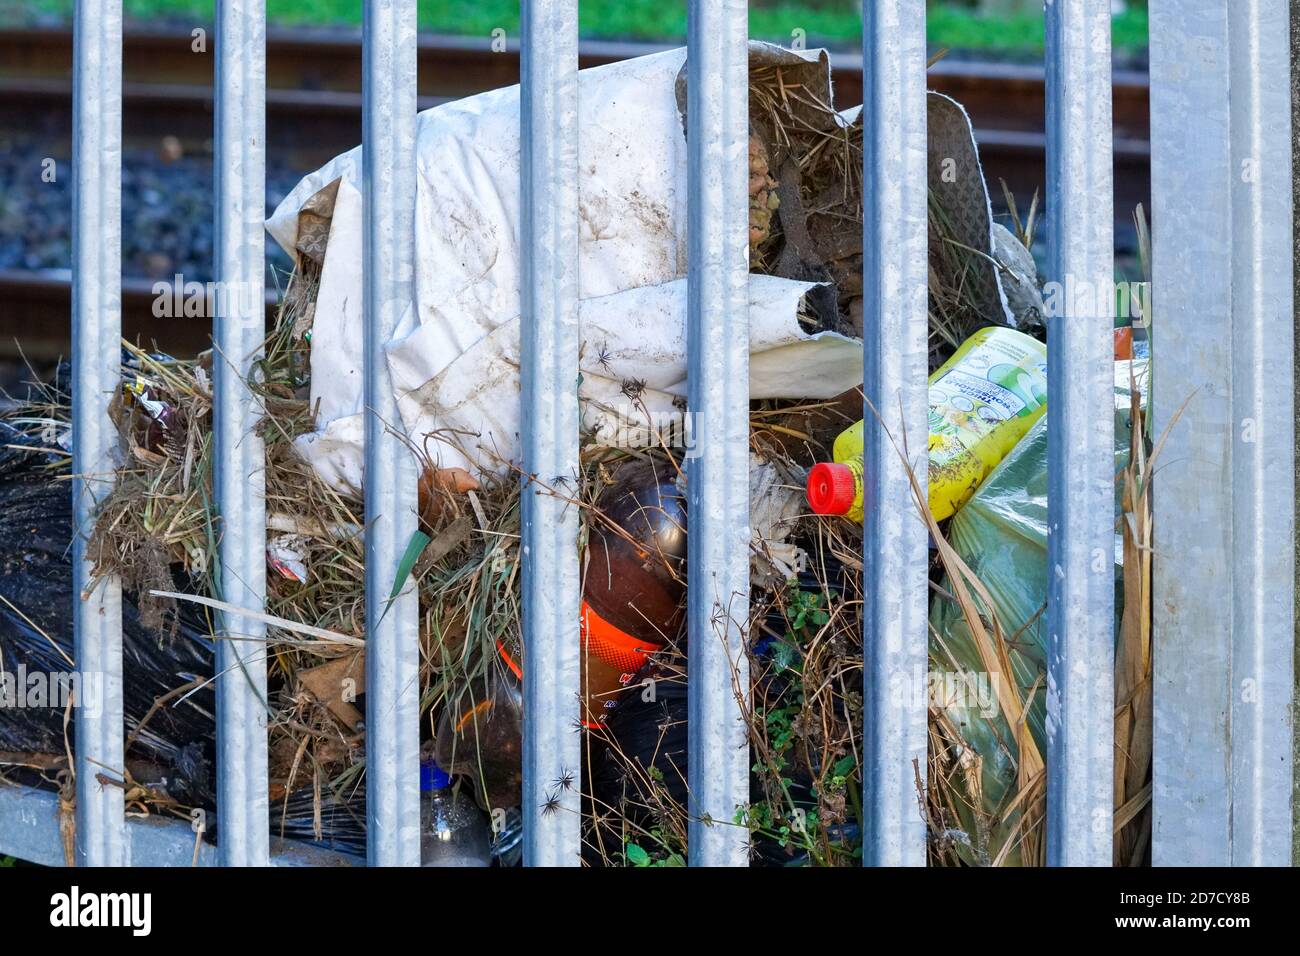 garbage, rubbish, environmental hazard dumped behind fence of a railway line illegally showing damage to the environment Stock Photo